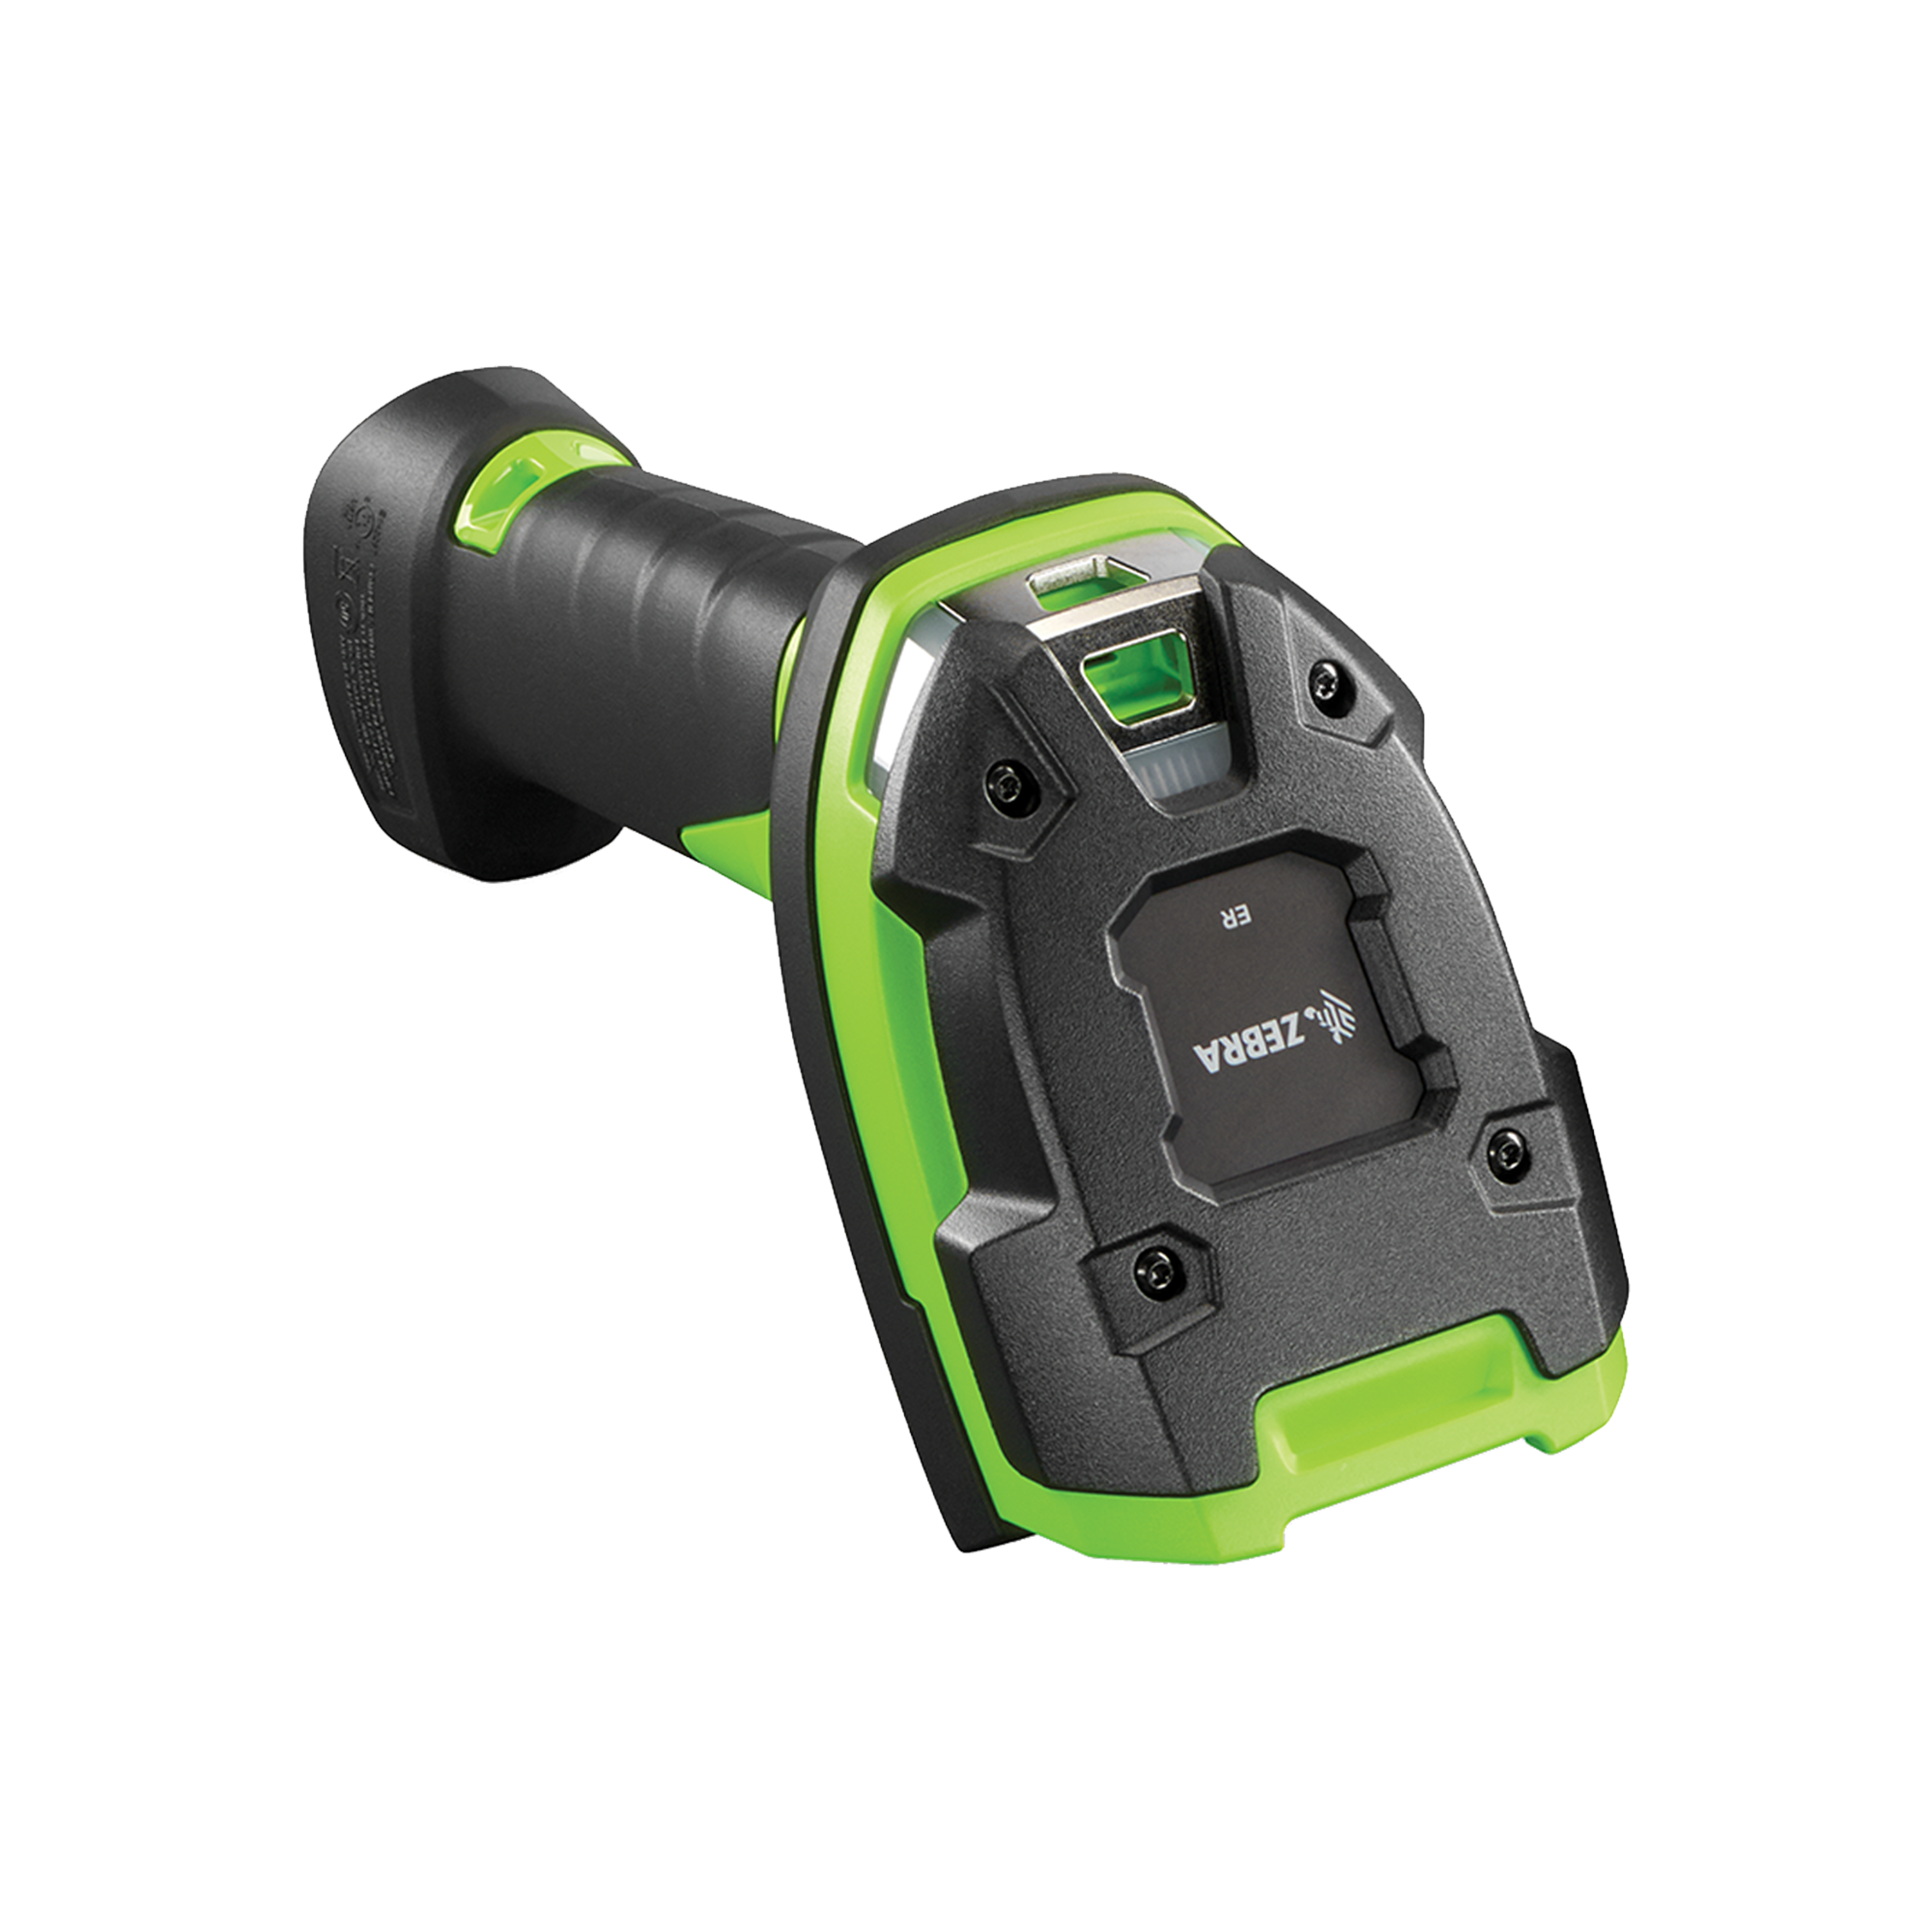 Zebra Rugged, Area Imager, High Performance, Corded, Industrial Green, Vibration Motor